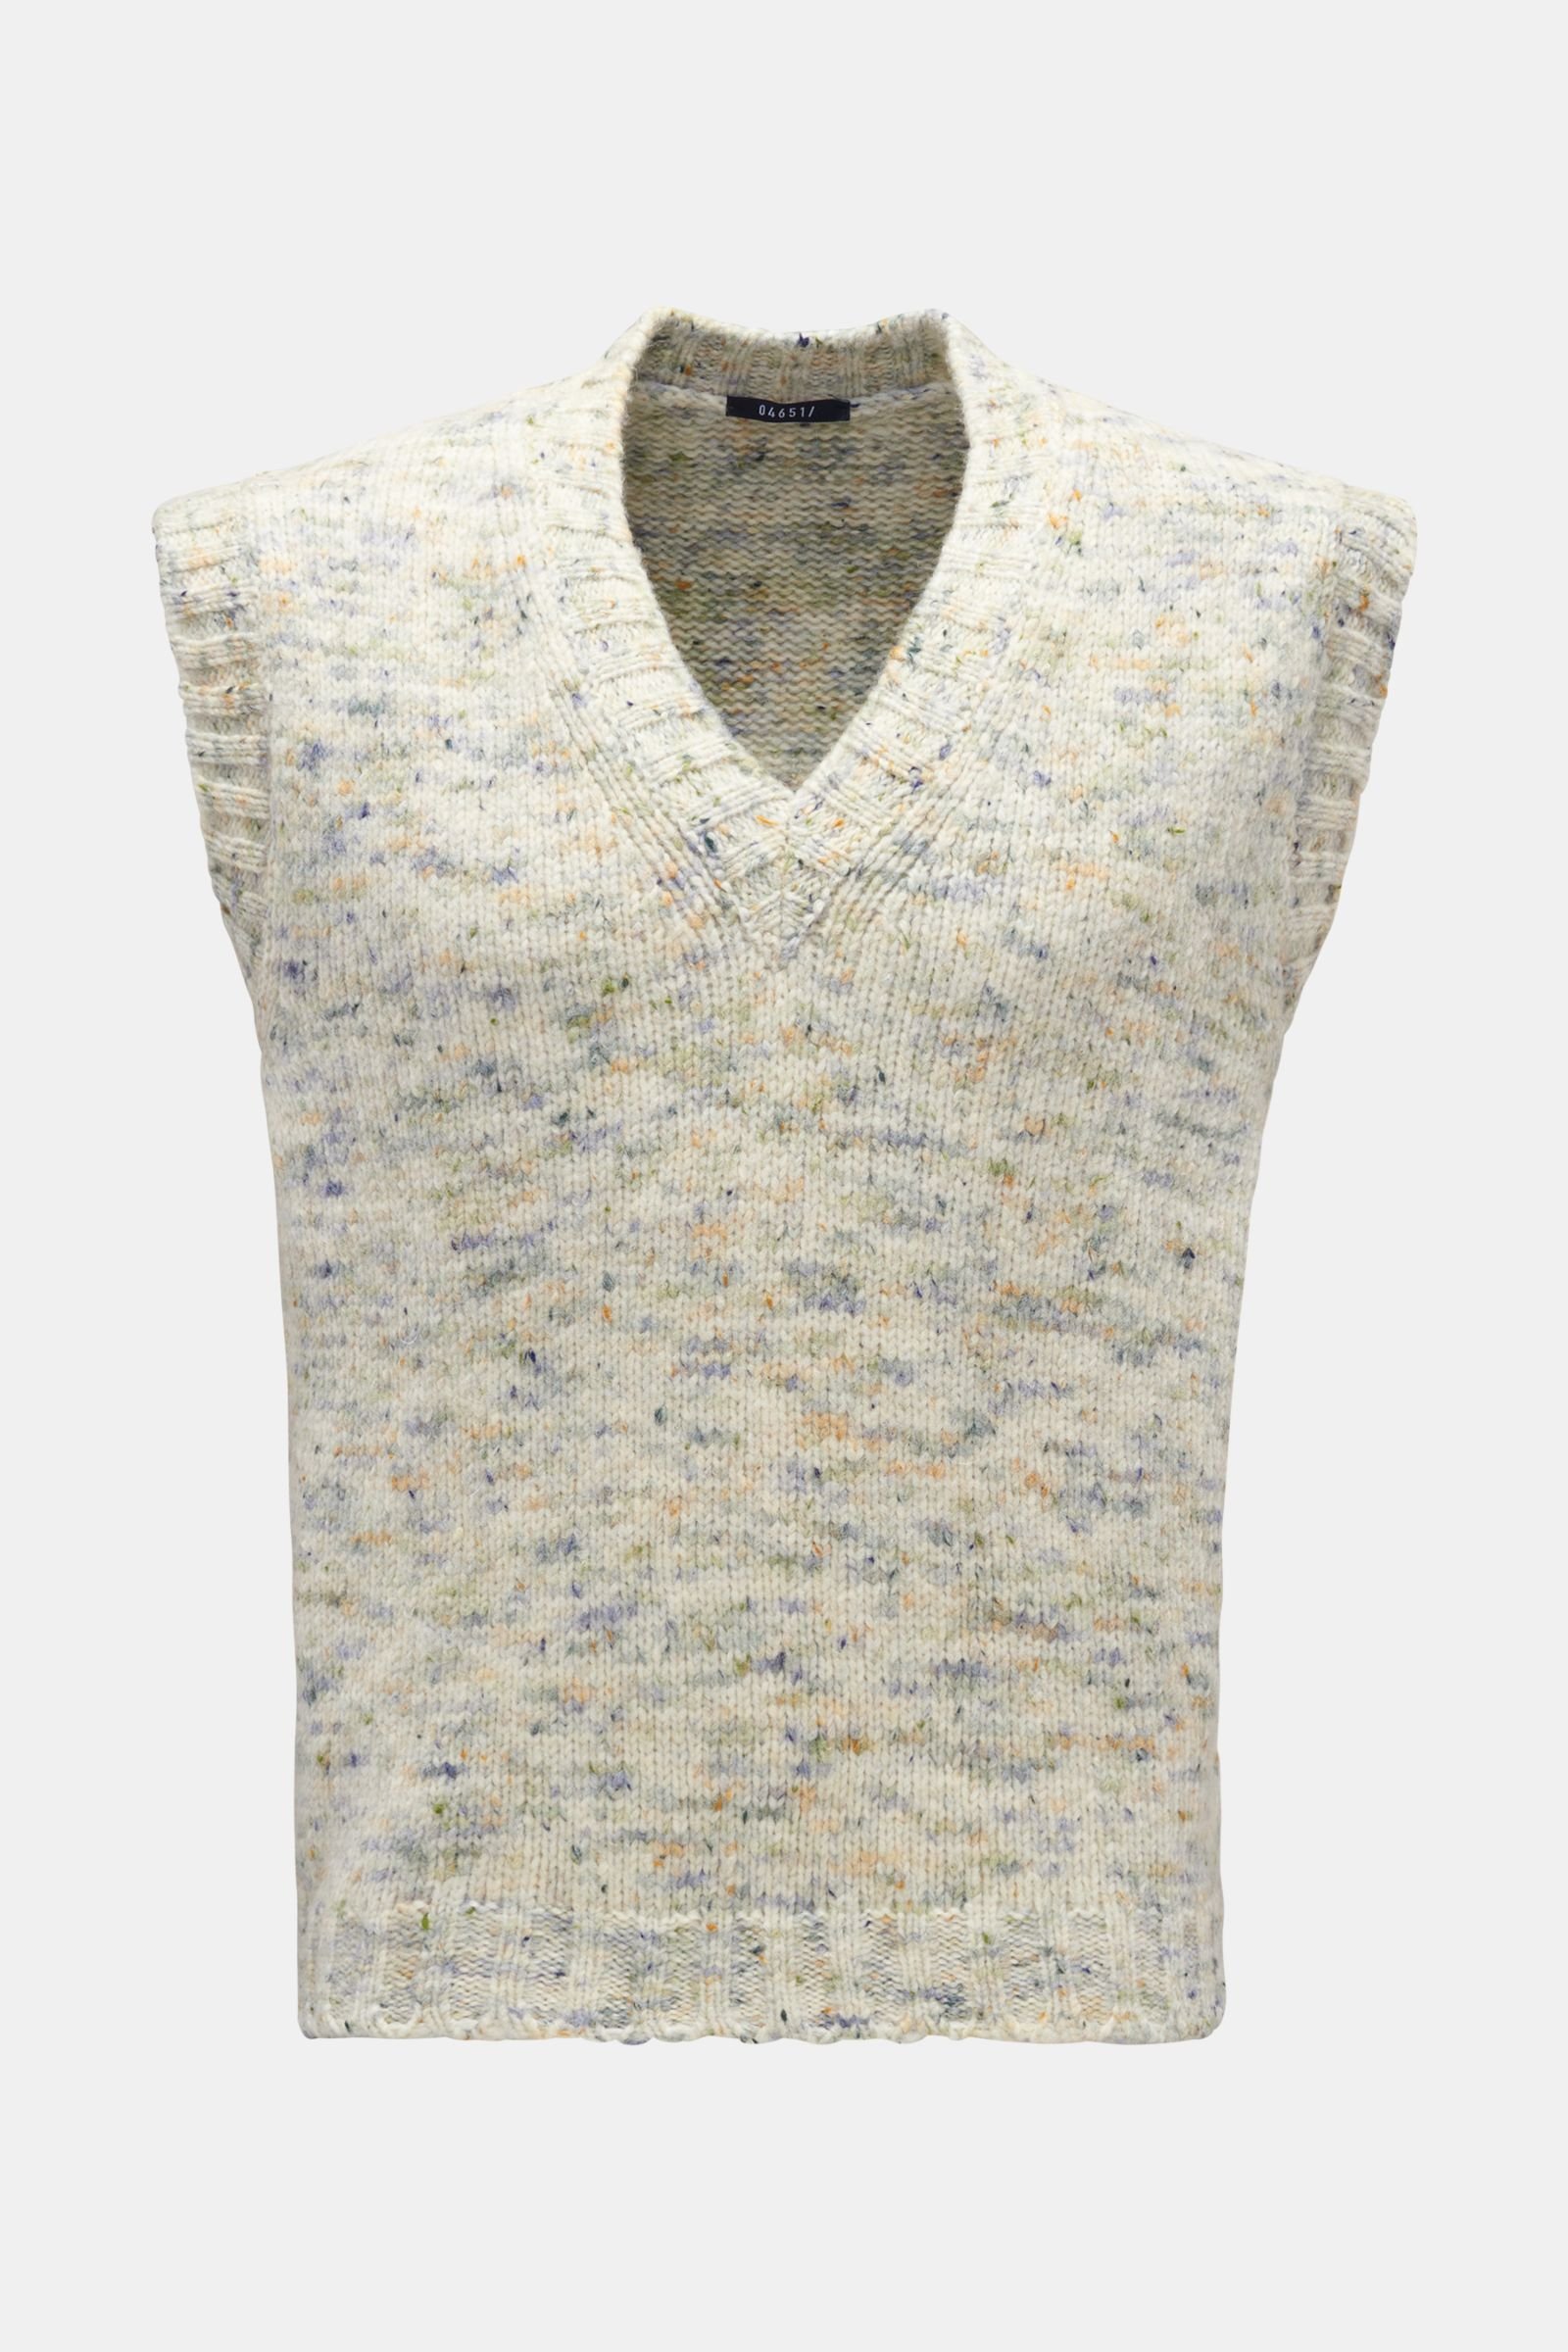 Sweater vest 'Donegal' cream/grey-blue patterned